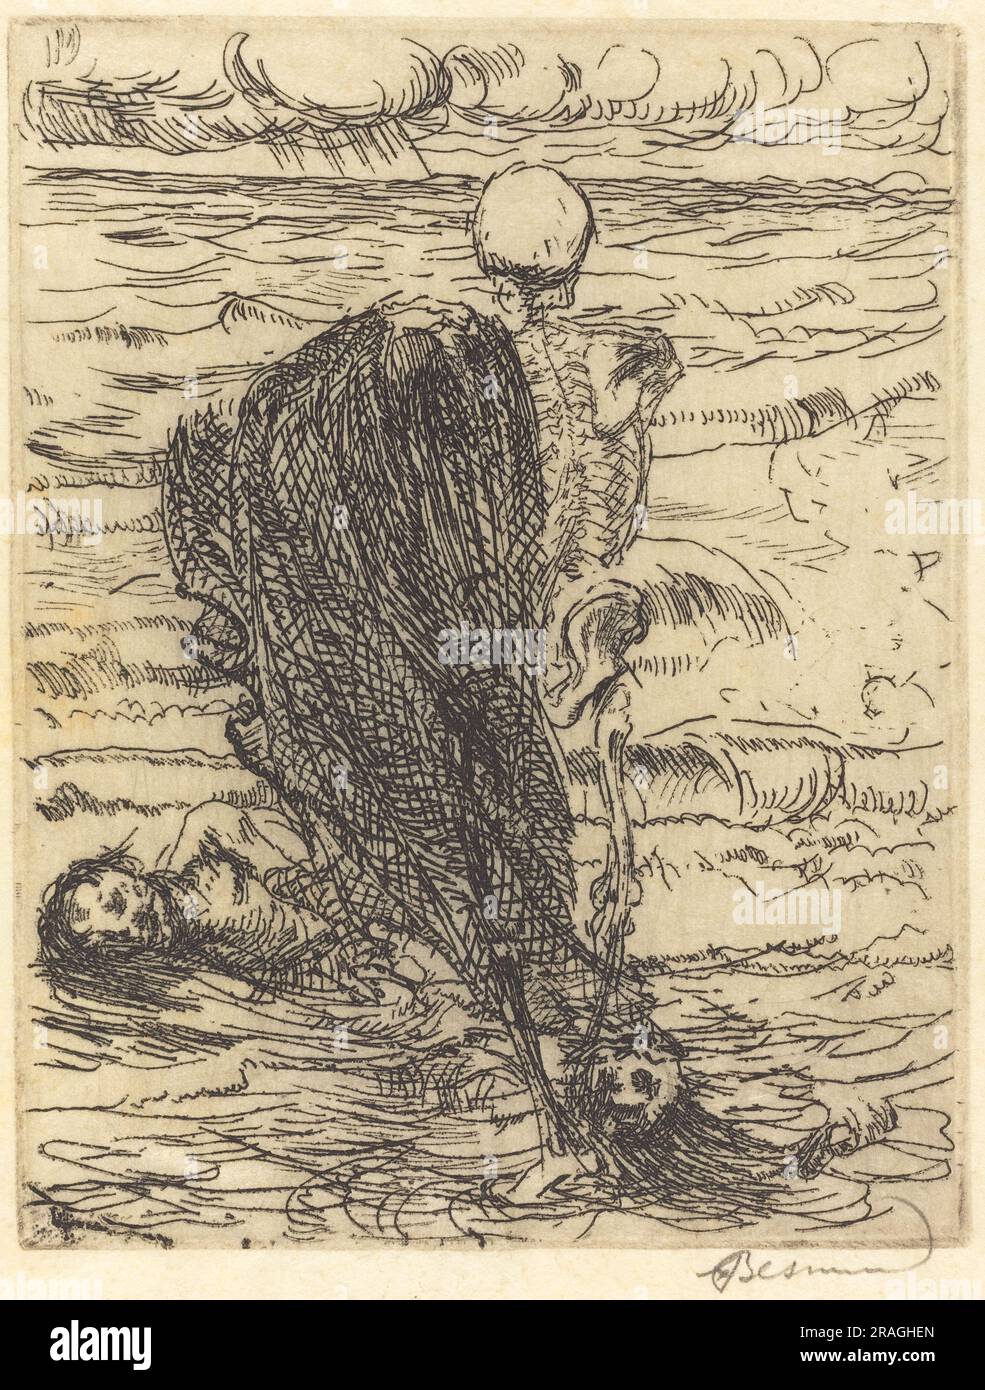 'Albert Besnard, Cast of a Net (Le coup de filet), 1900, etching in black on vellum, plate: 13.4 x 10.4 cm (5 1/4 x 4 1/8 in.) sheet: 34.5 x 24.4 cm (13 9/16 x 9 5/8 in.), Gift of Mr. and Mrs. Daniel Bell, 1994.4.14' Stock Photo